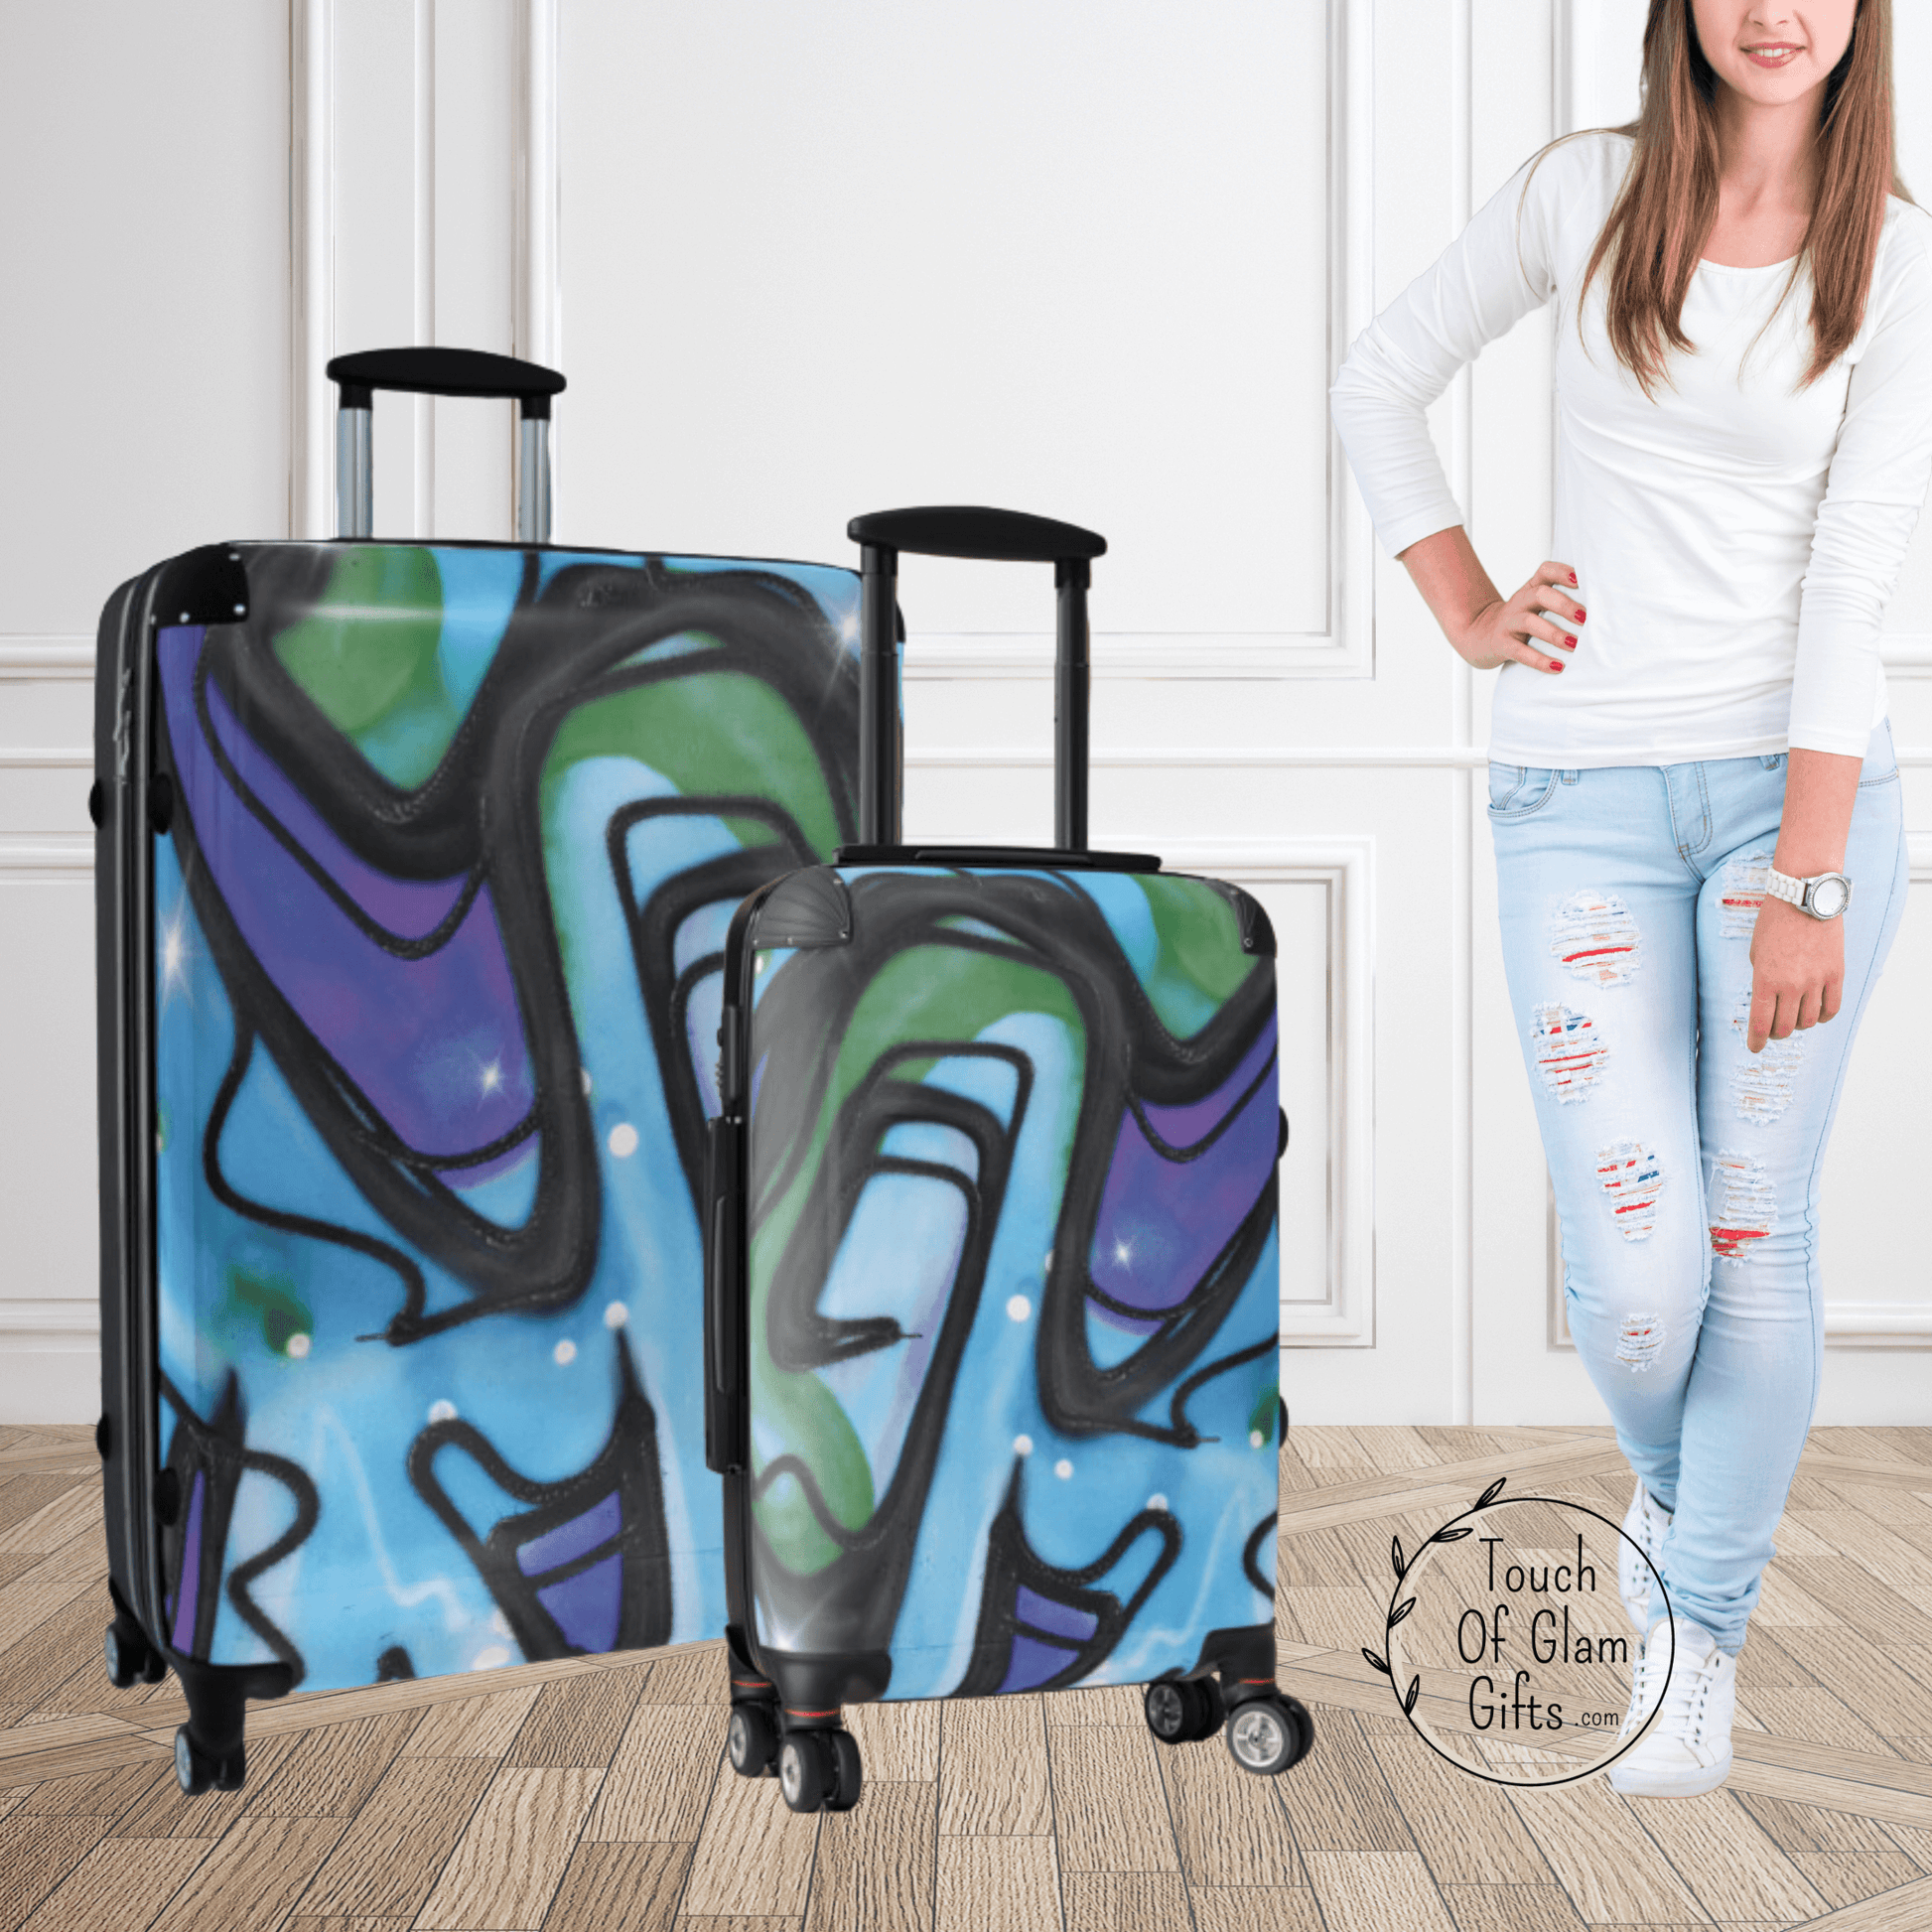 Teen girls love the blue retro design of our luggage. This teen girl has the large suitcase with spinner wheels and the carry on size. The shades of blue and black and green in a graffiti design has a retro feel.